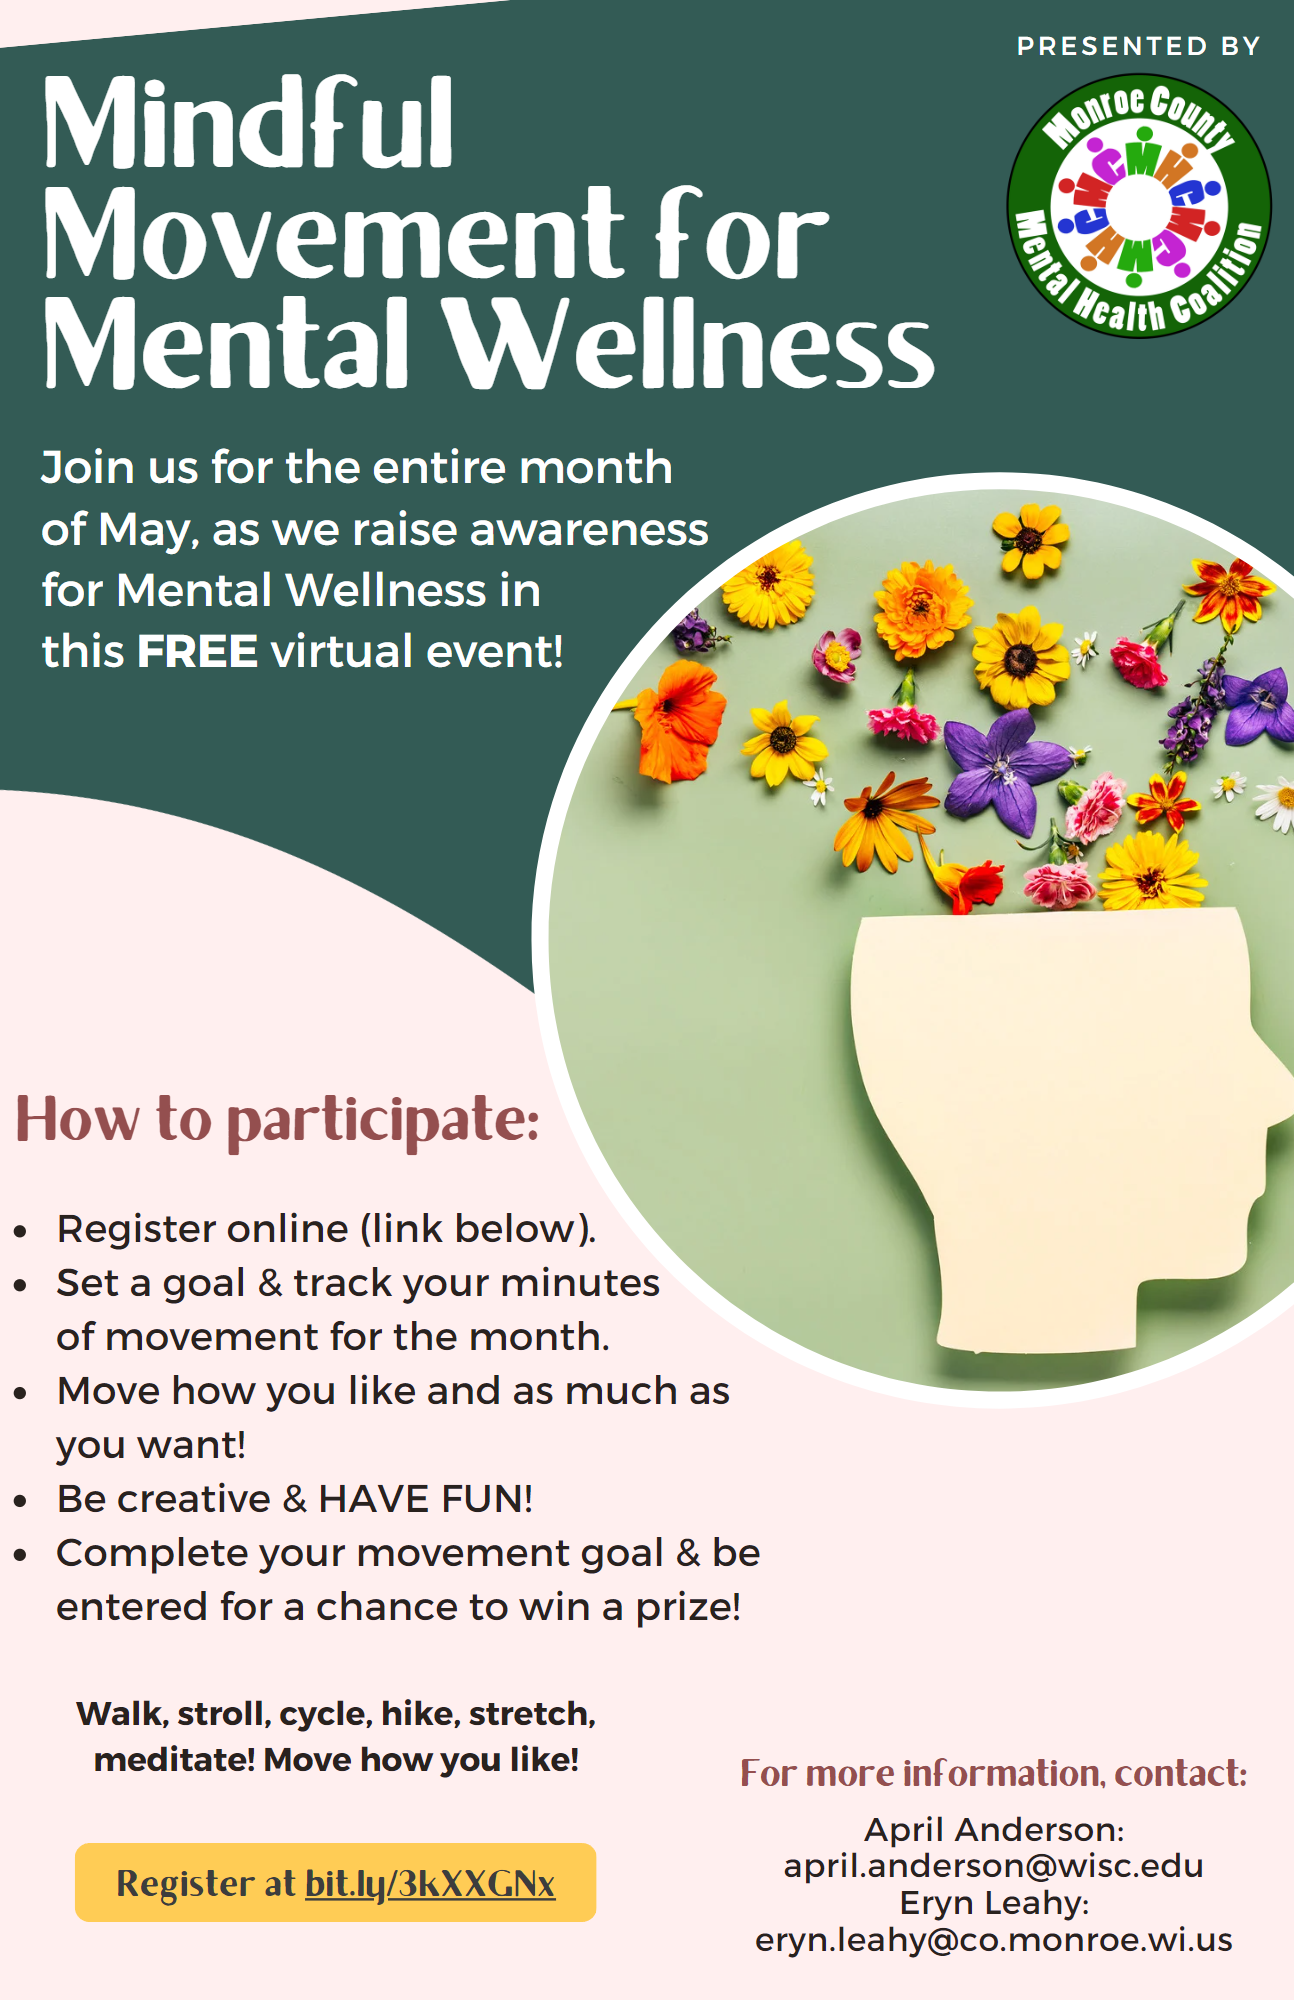 Mindful Movement for Mental Wellness – Extension Monroe County